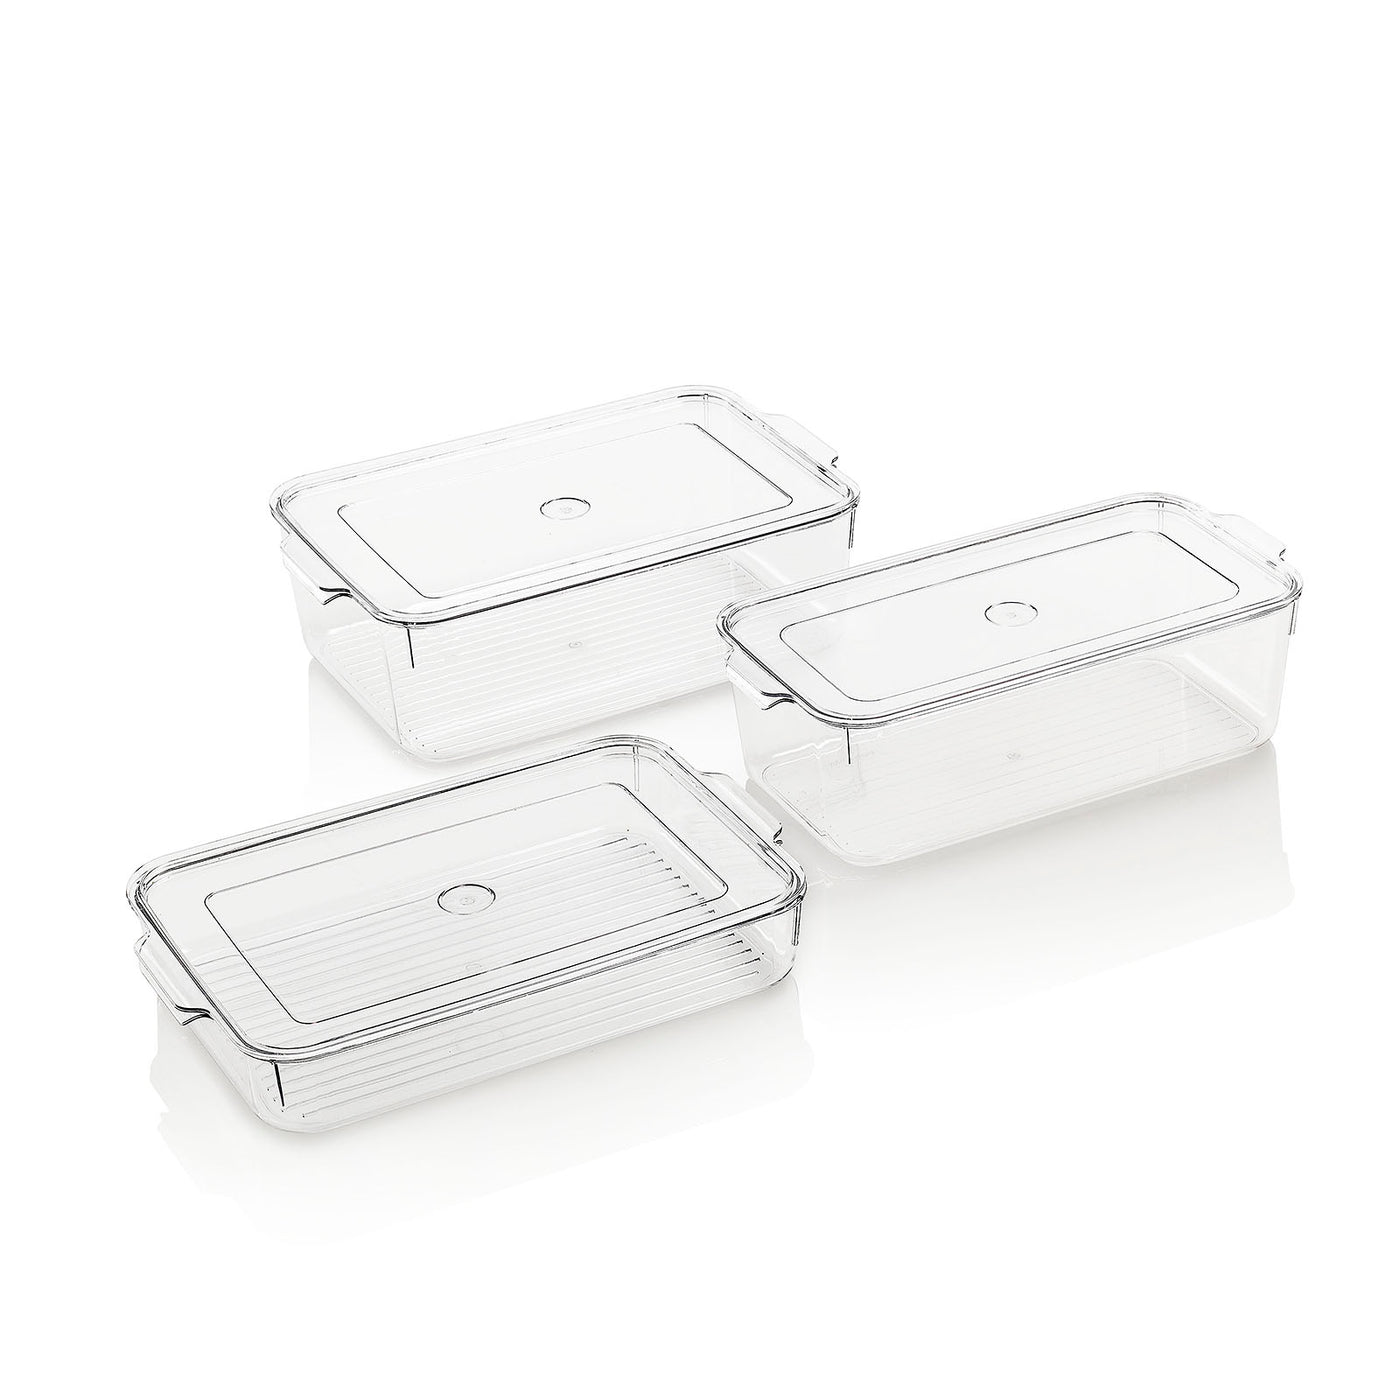 Set of 3 WOOI-C containers with lids